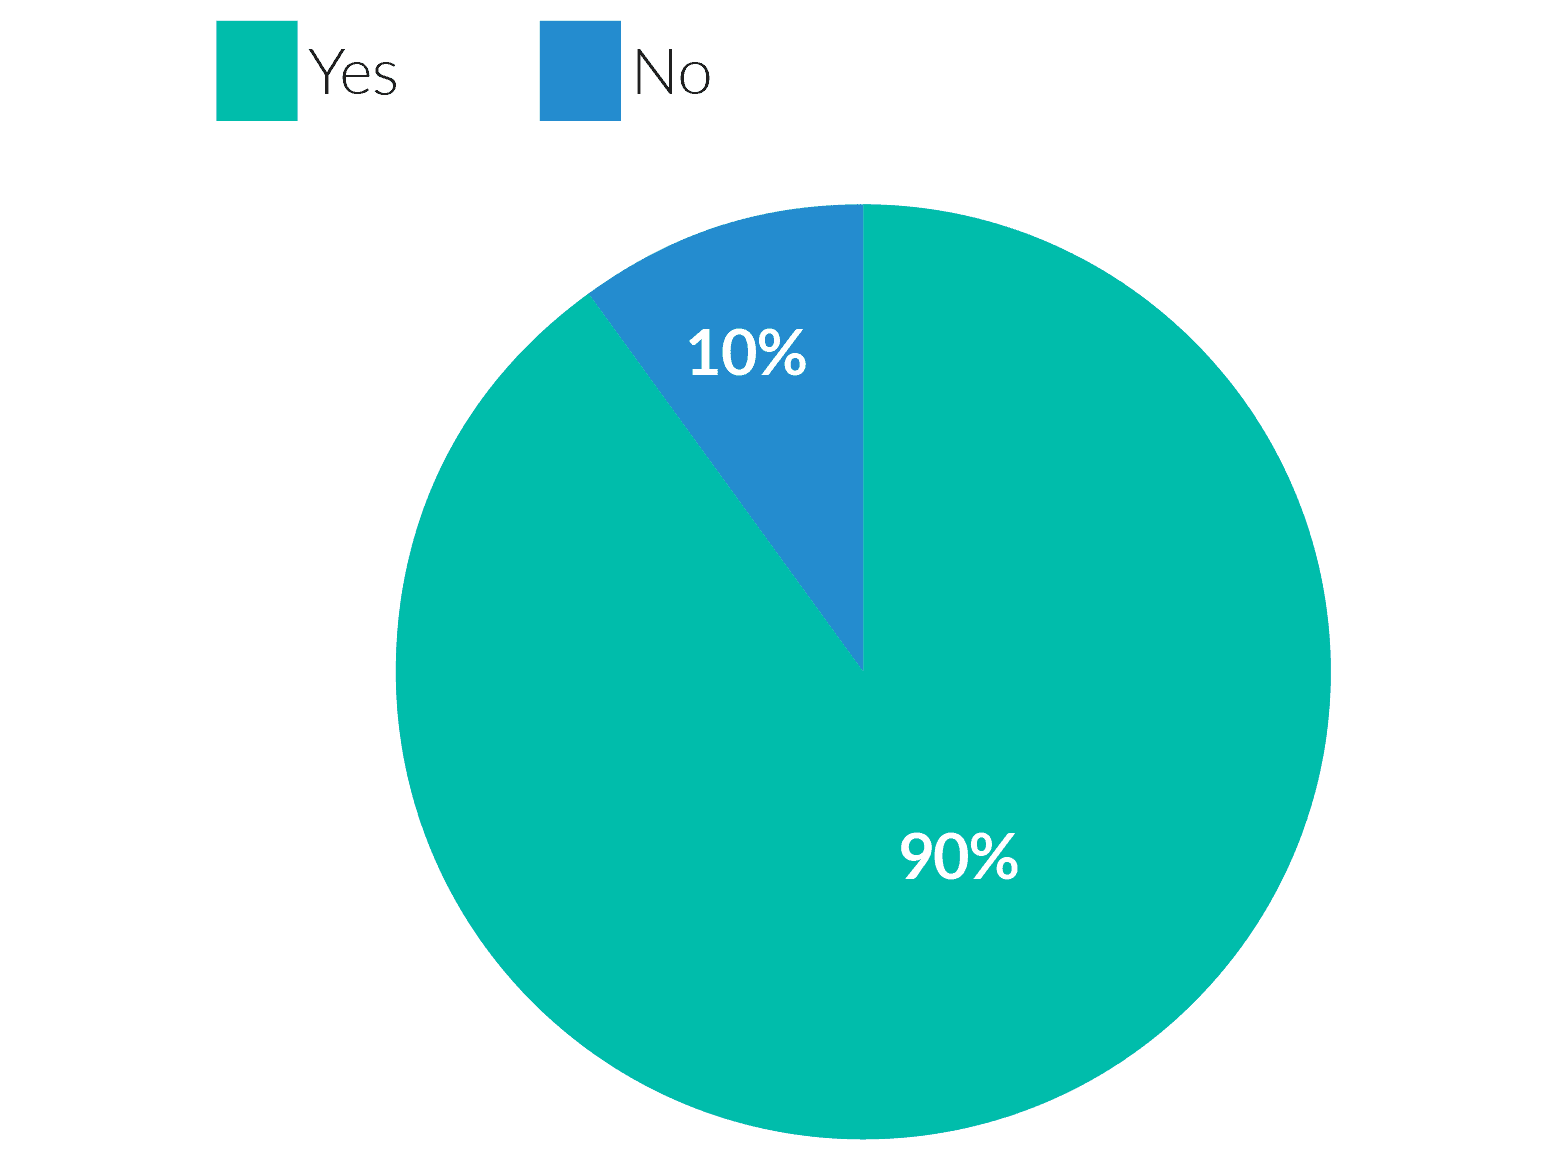 Have you used Morningscore more than once? - pie chart